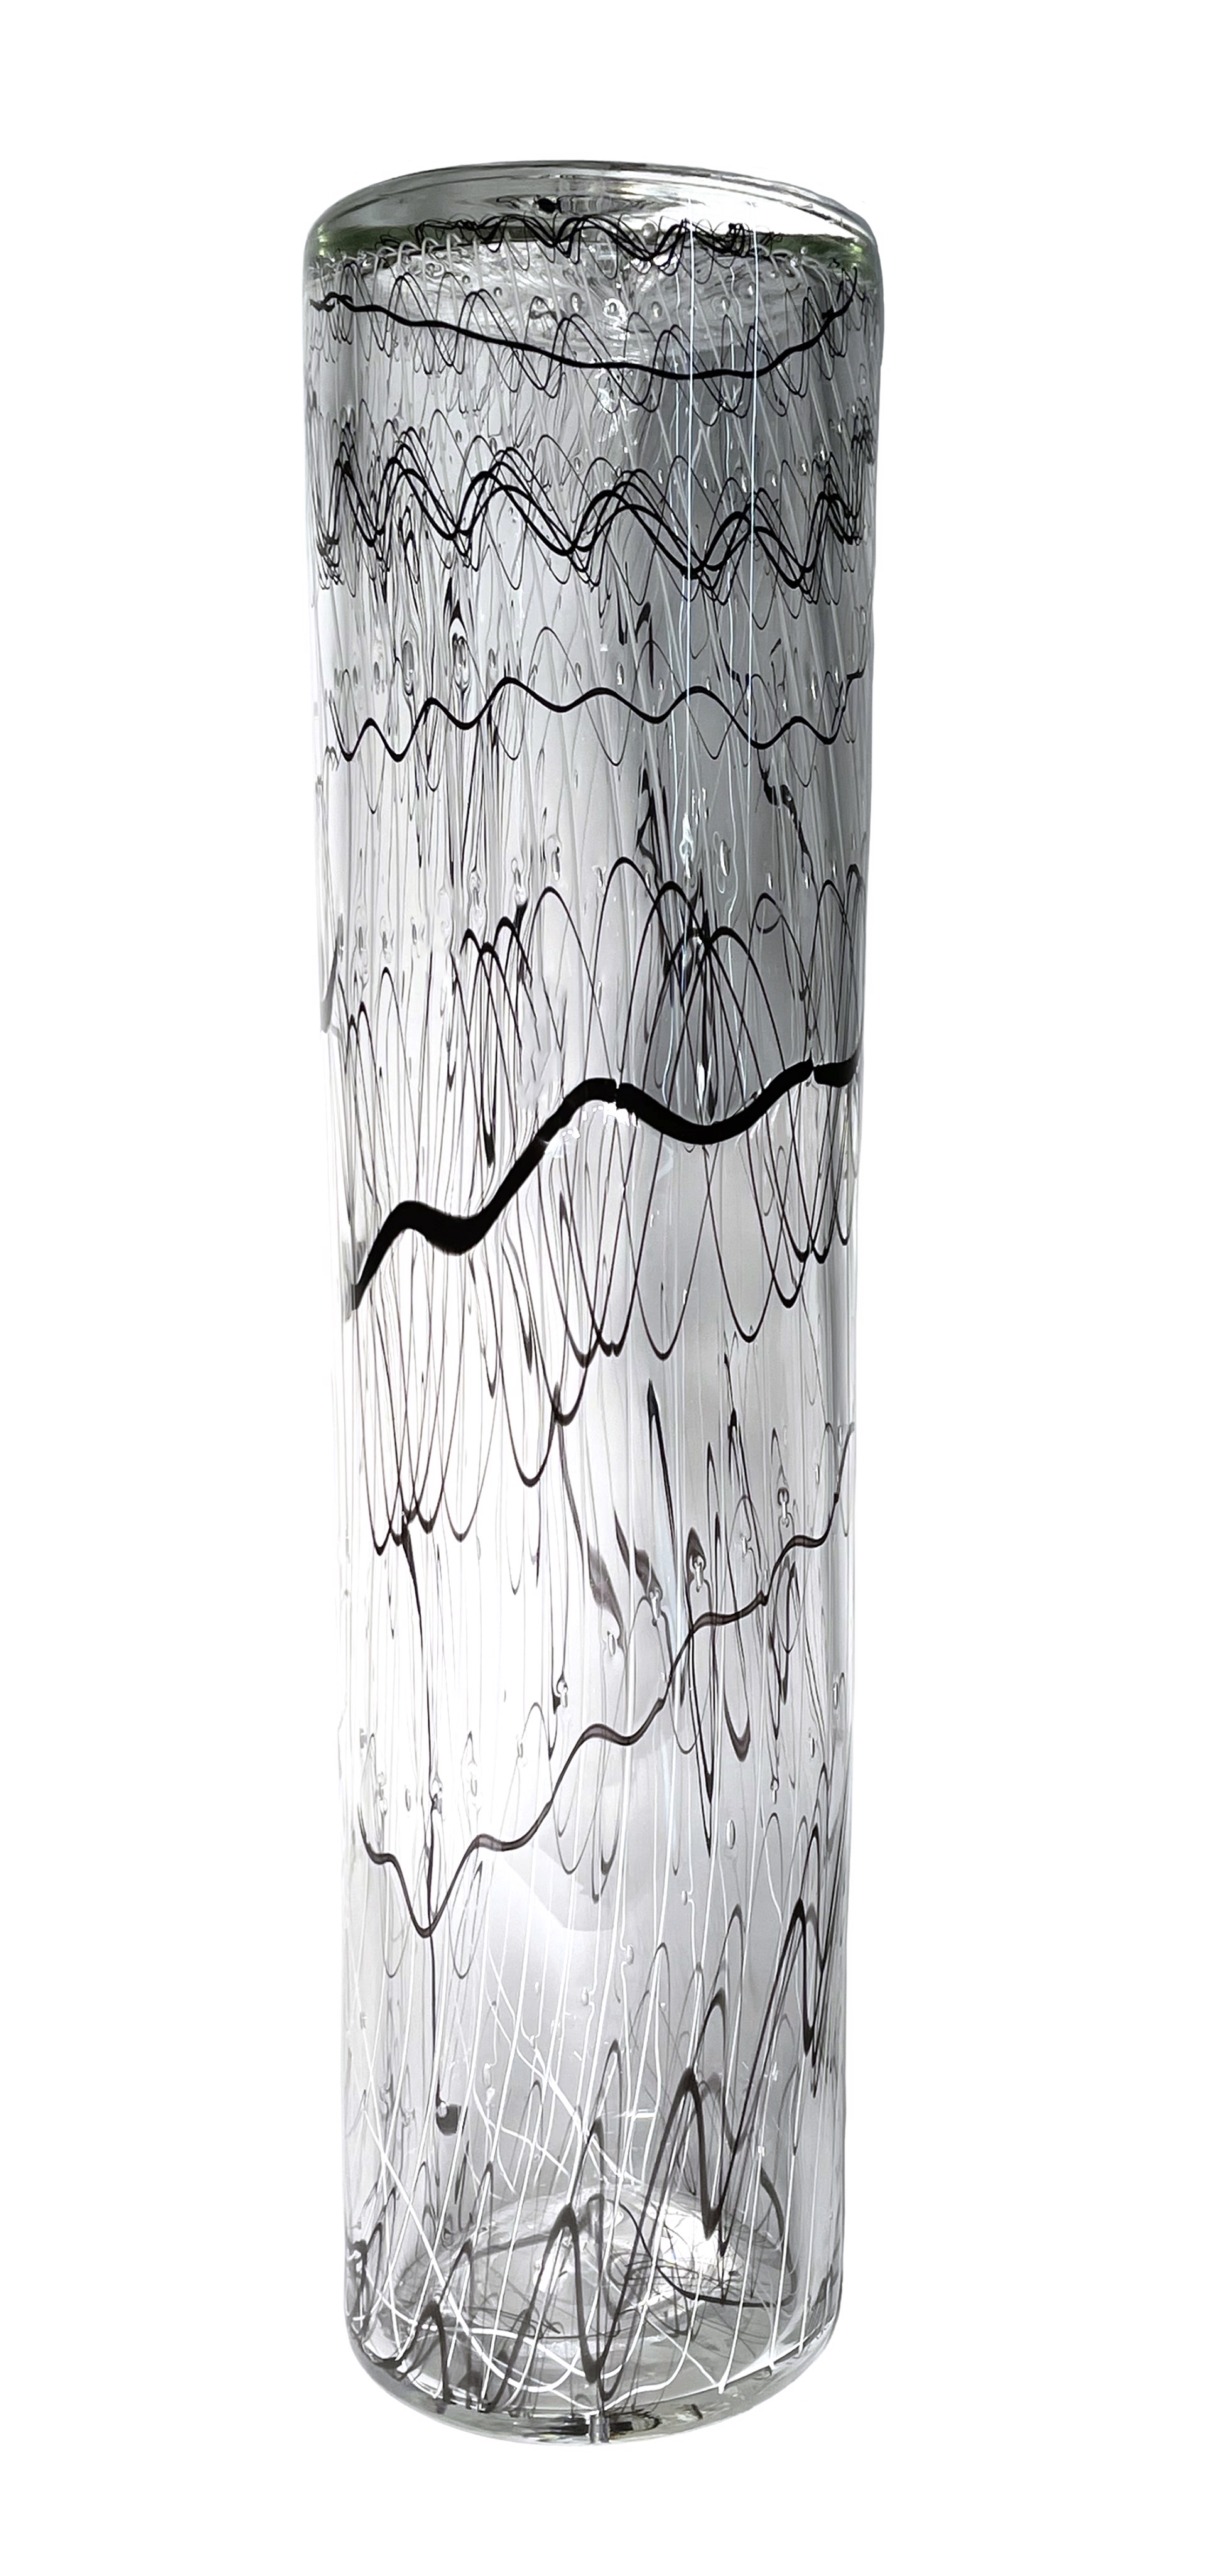 Blanket Cylinder 5 by Simon Waranch